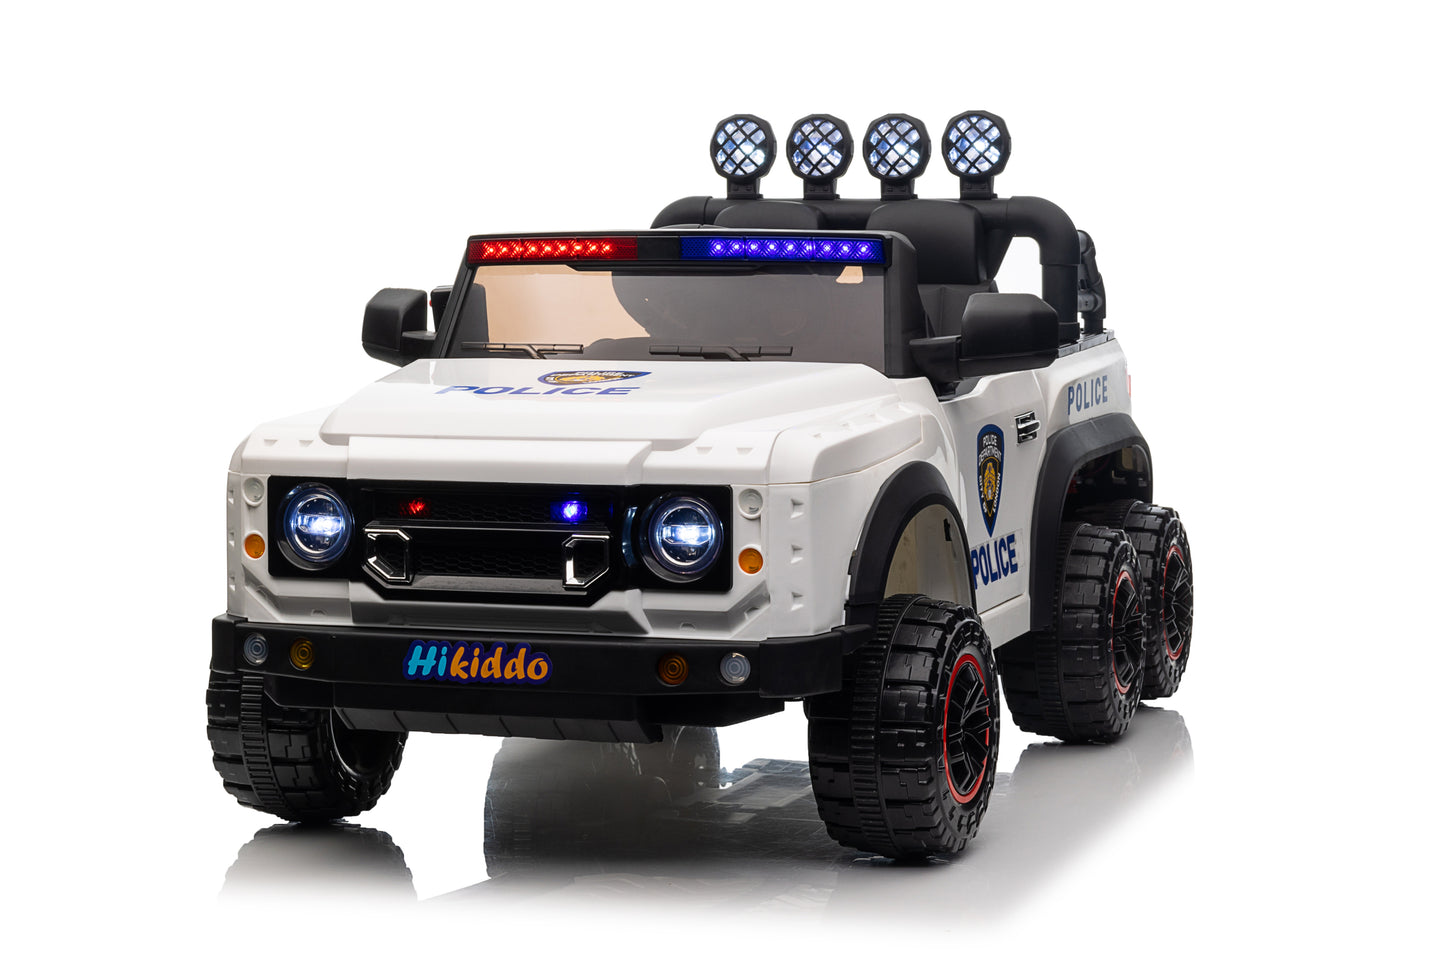 24VUSB/MP3/Bluetooth Four Wheel Absorber with Music and Light, 2 Doors, Power Display, 2.4G R/C